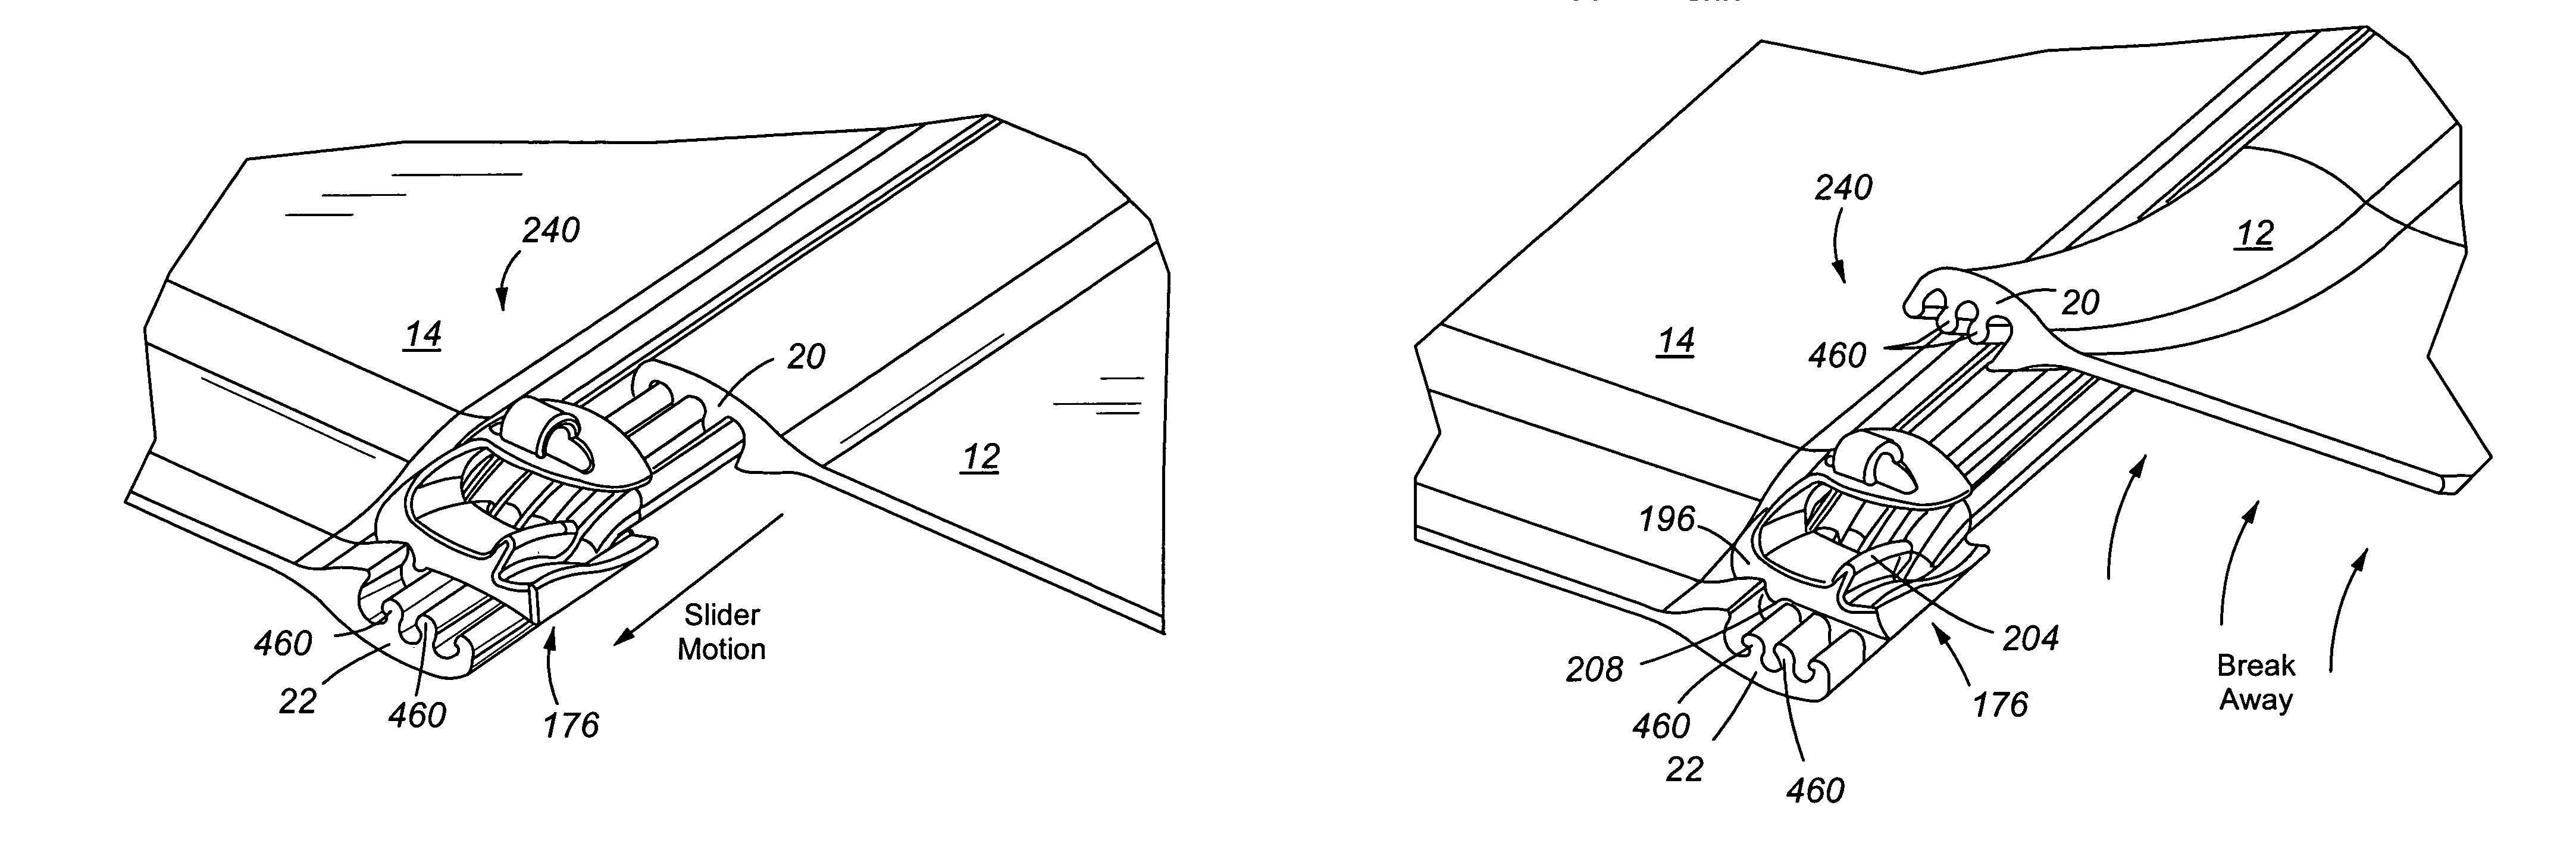 Device for creating a seal between fabrics or other materials